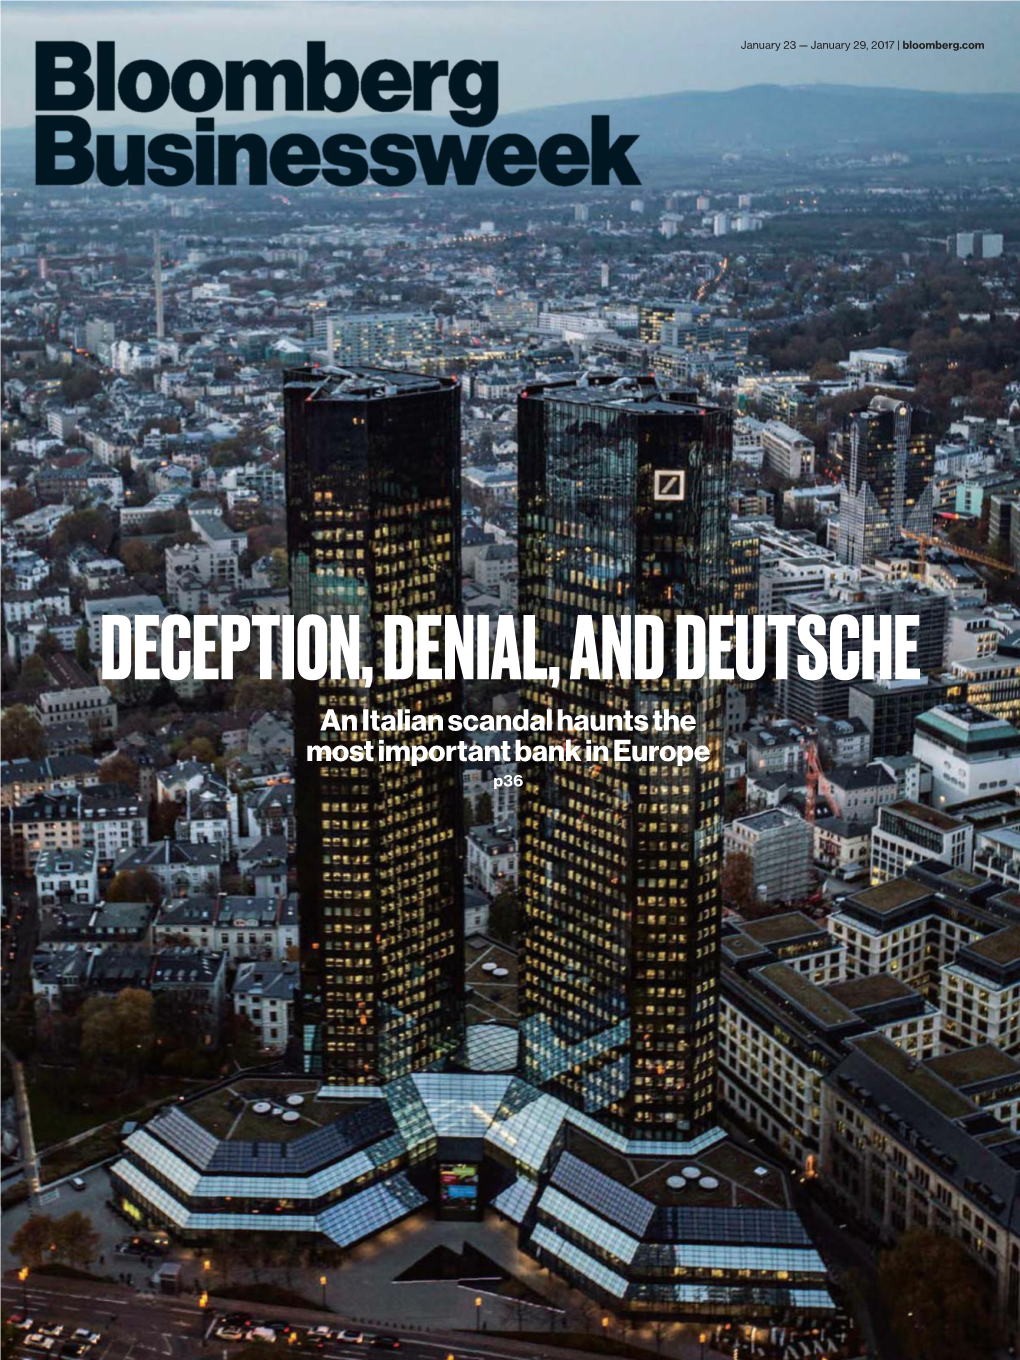 DECEPTION, DENIAL, and DEUTSCHE an Italian Scandal Haunts the Most Important Bank in Europe P36